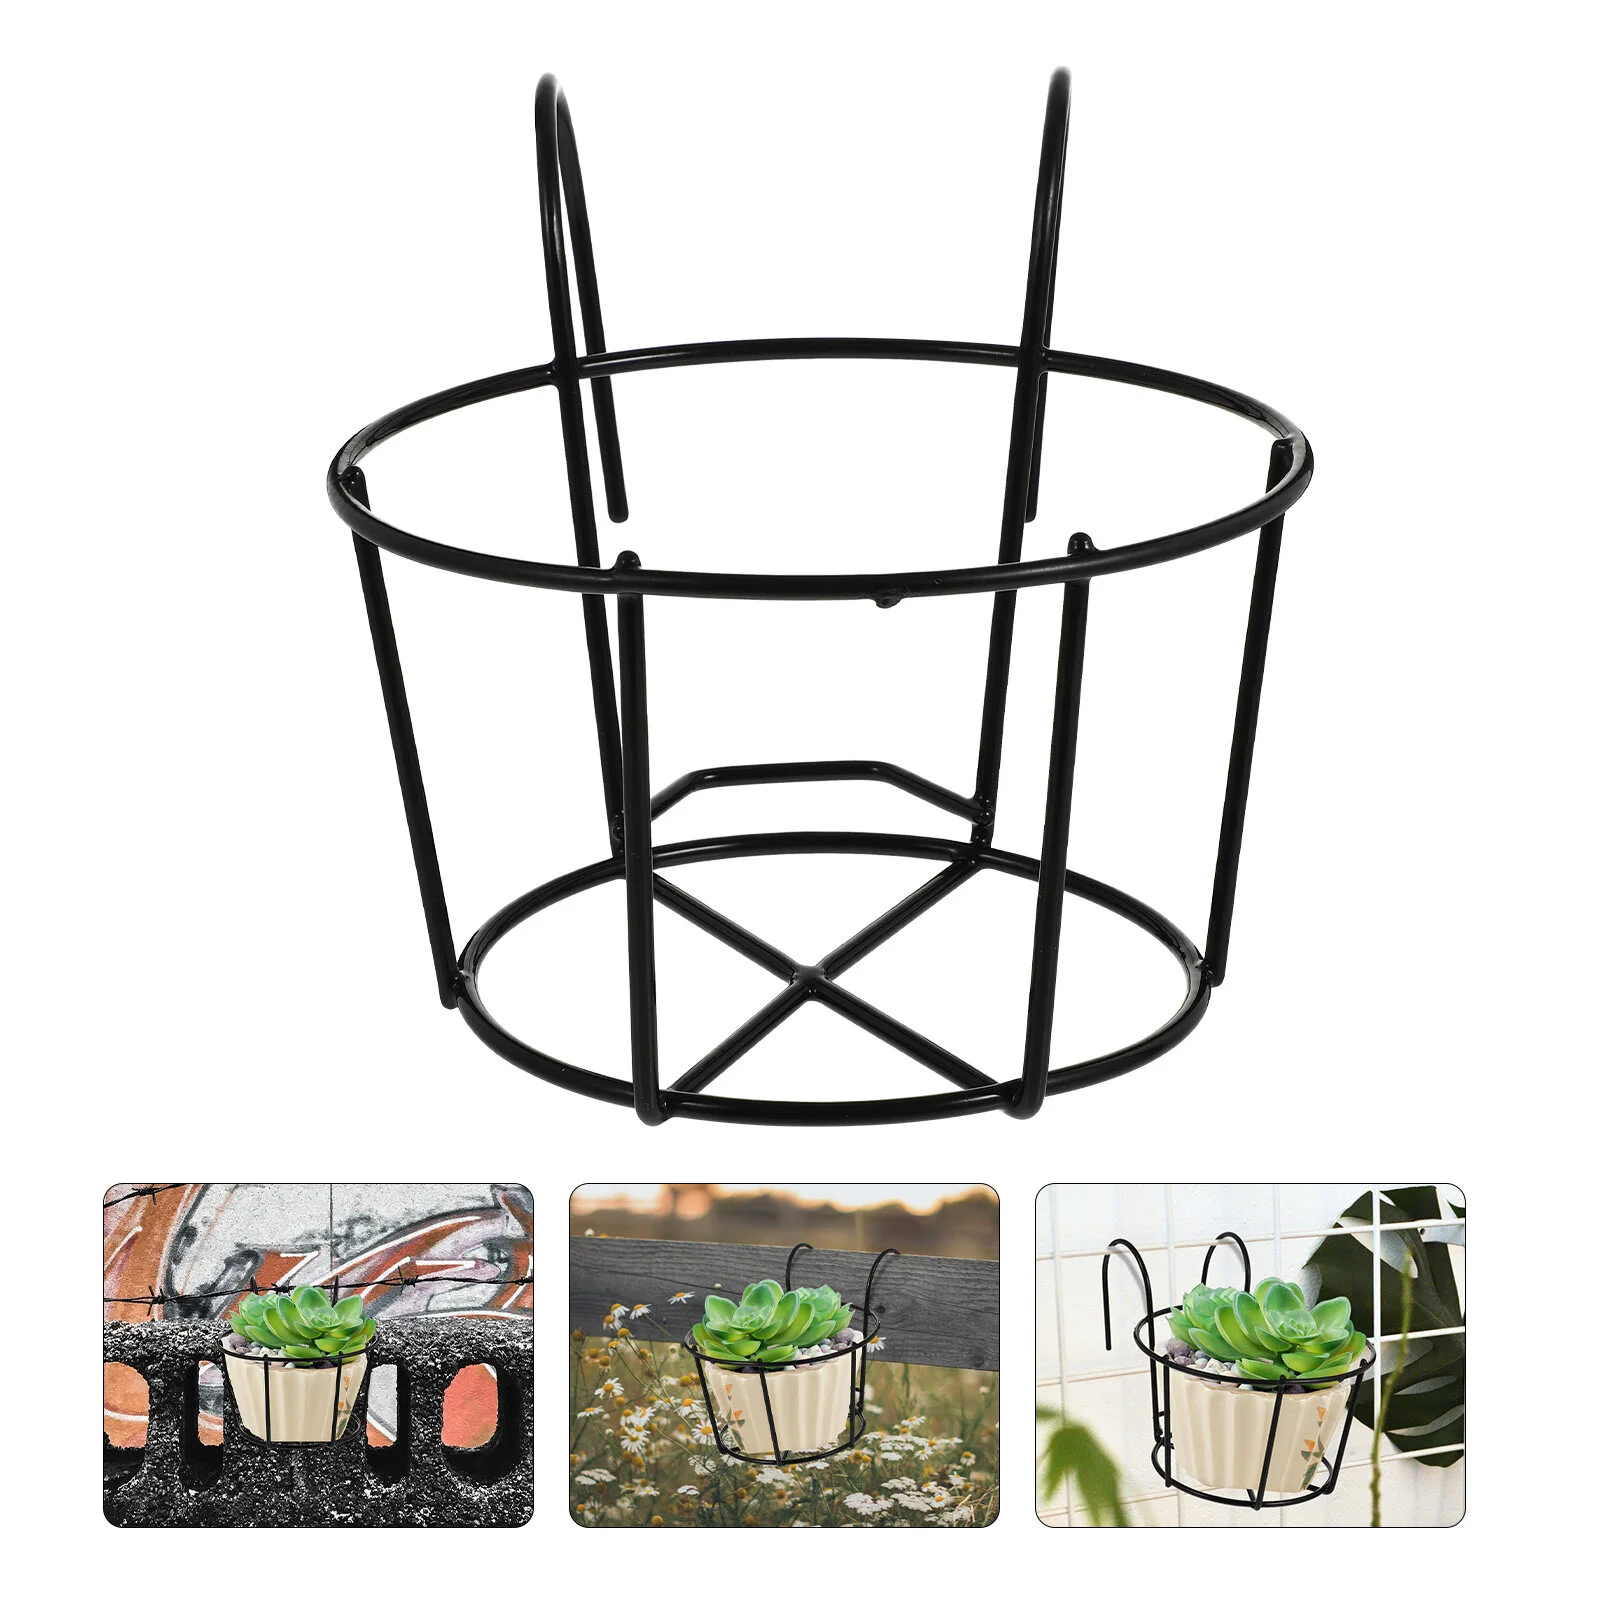 

2pcs Flower Pot Holder Hanging Baskets with Hook Garden Pots Planters Metal Bucket for Patio Balcony Porch Fence Size